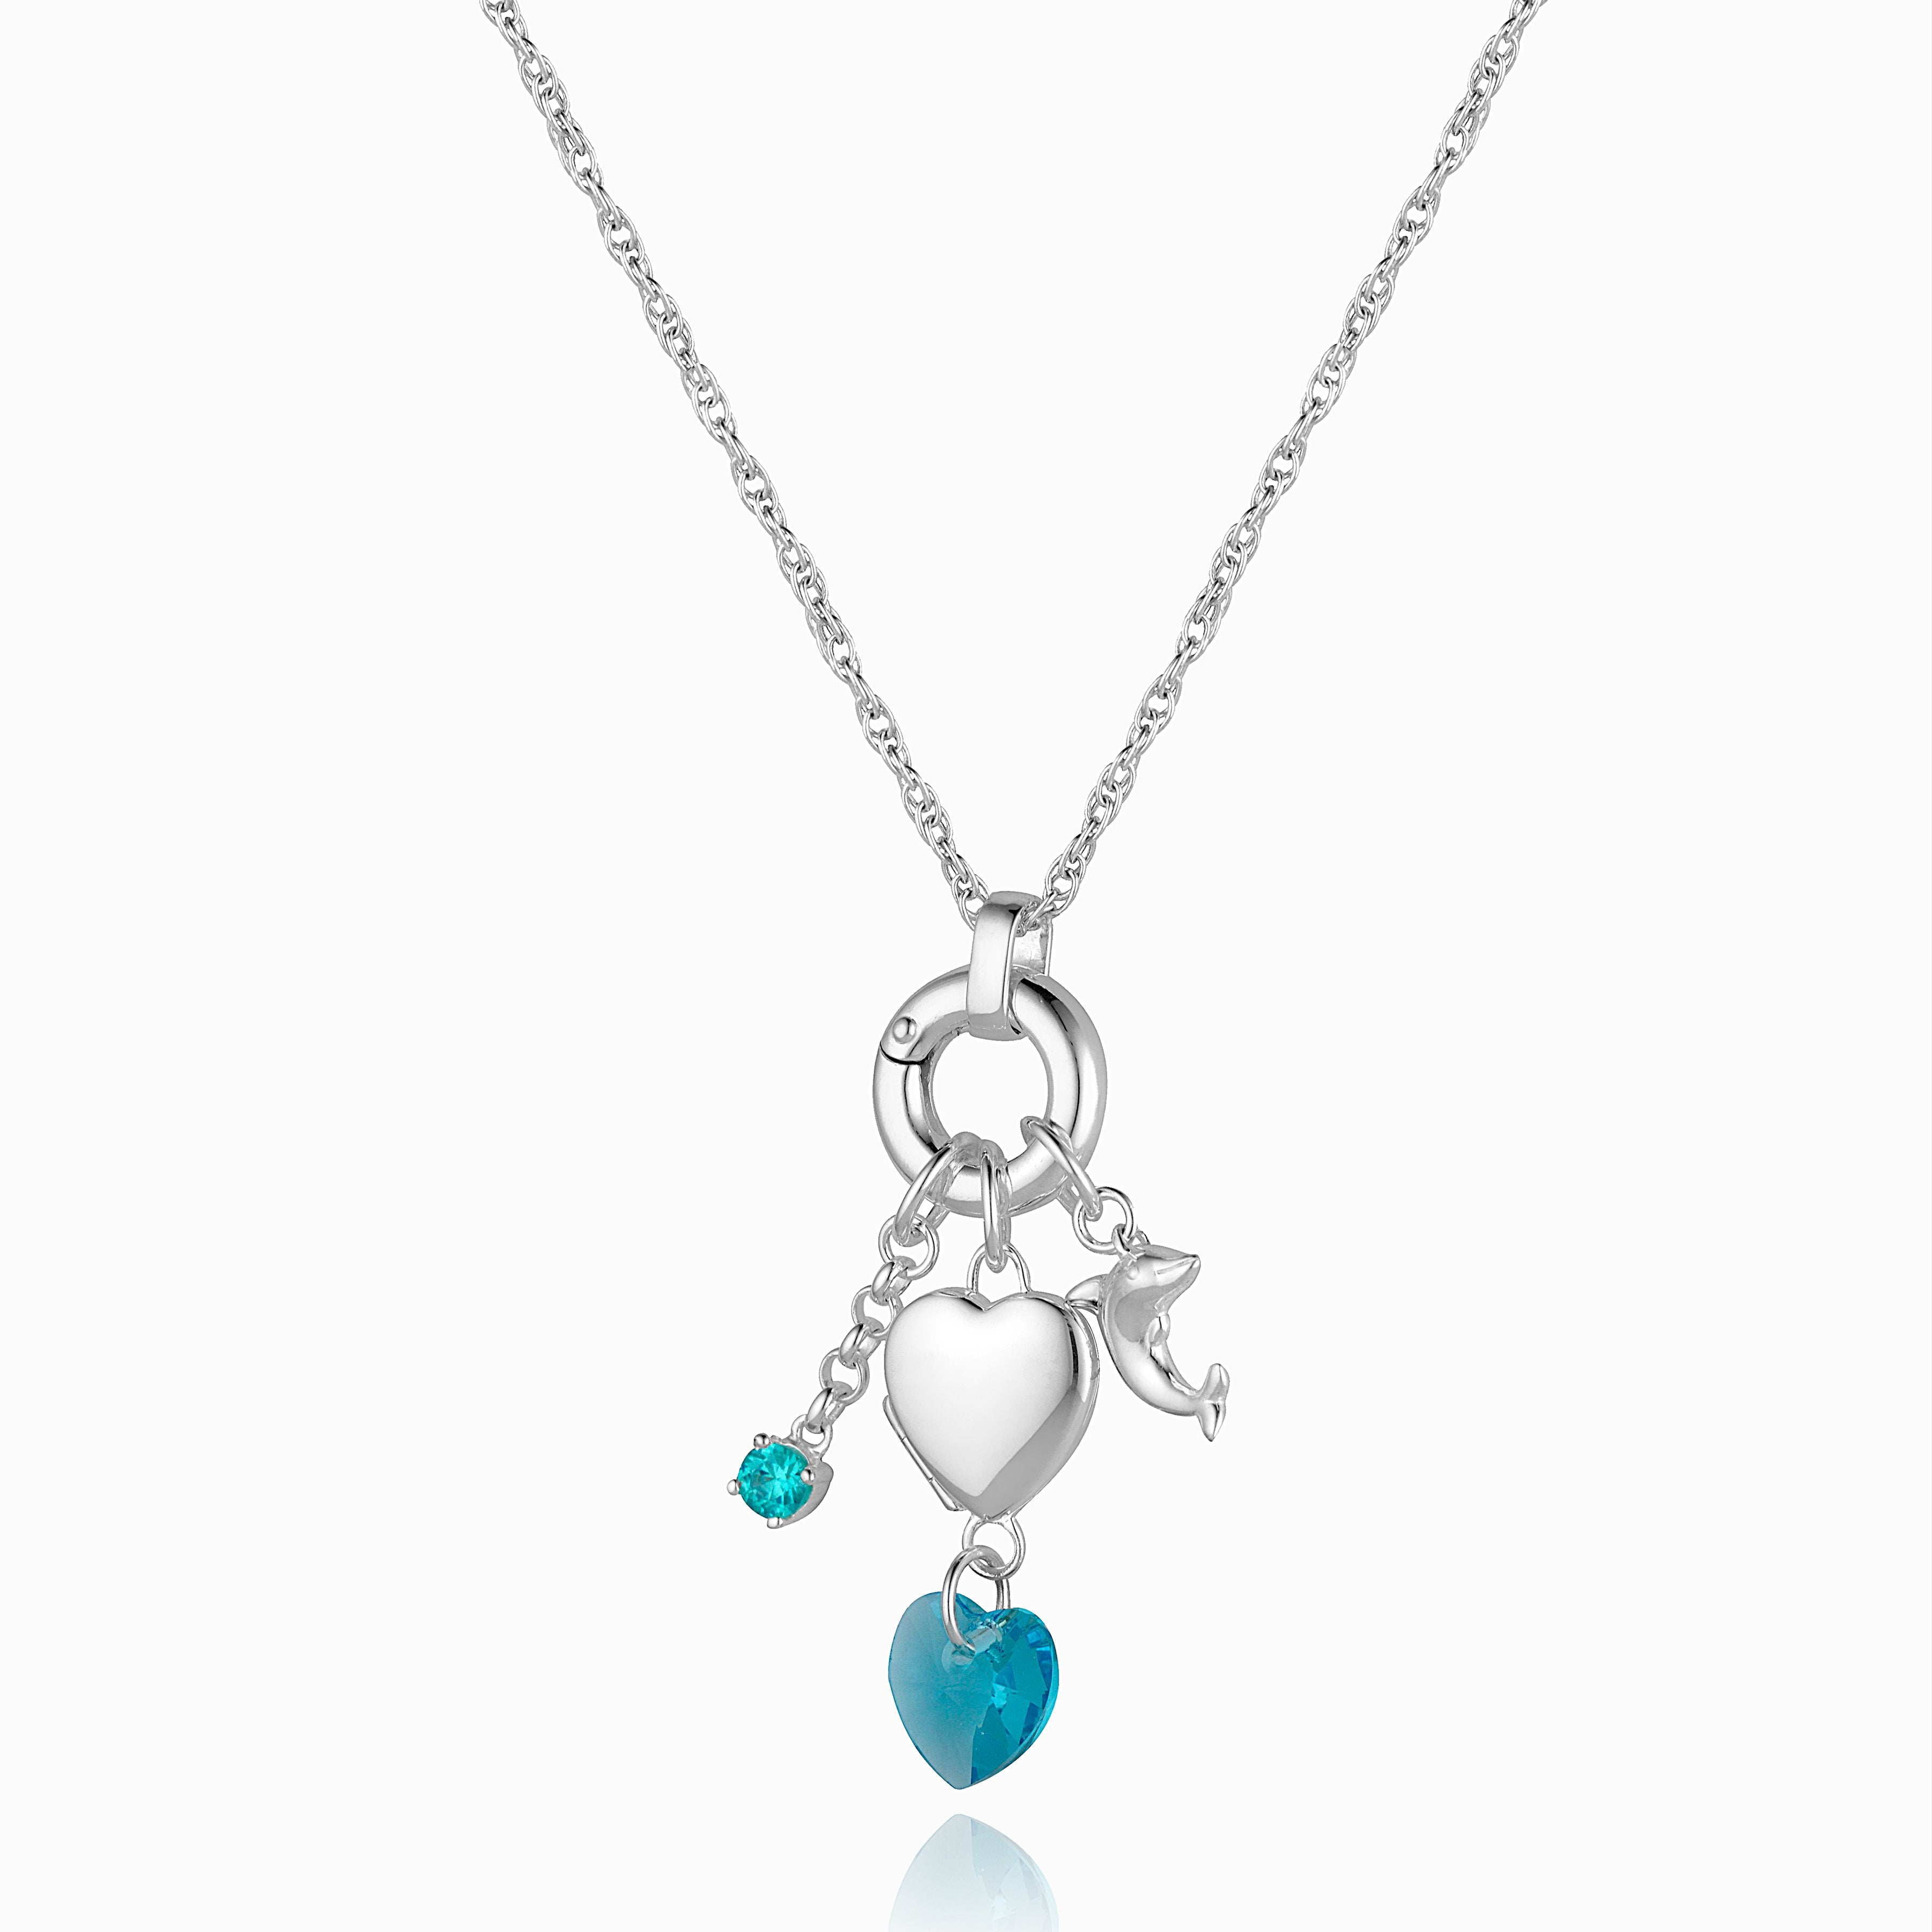 Product title: Dolphin Charm Locket, product type: Charm